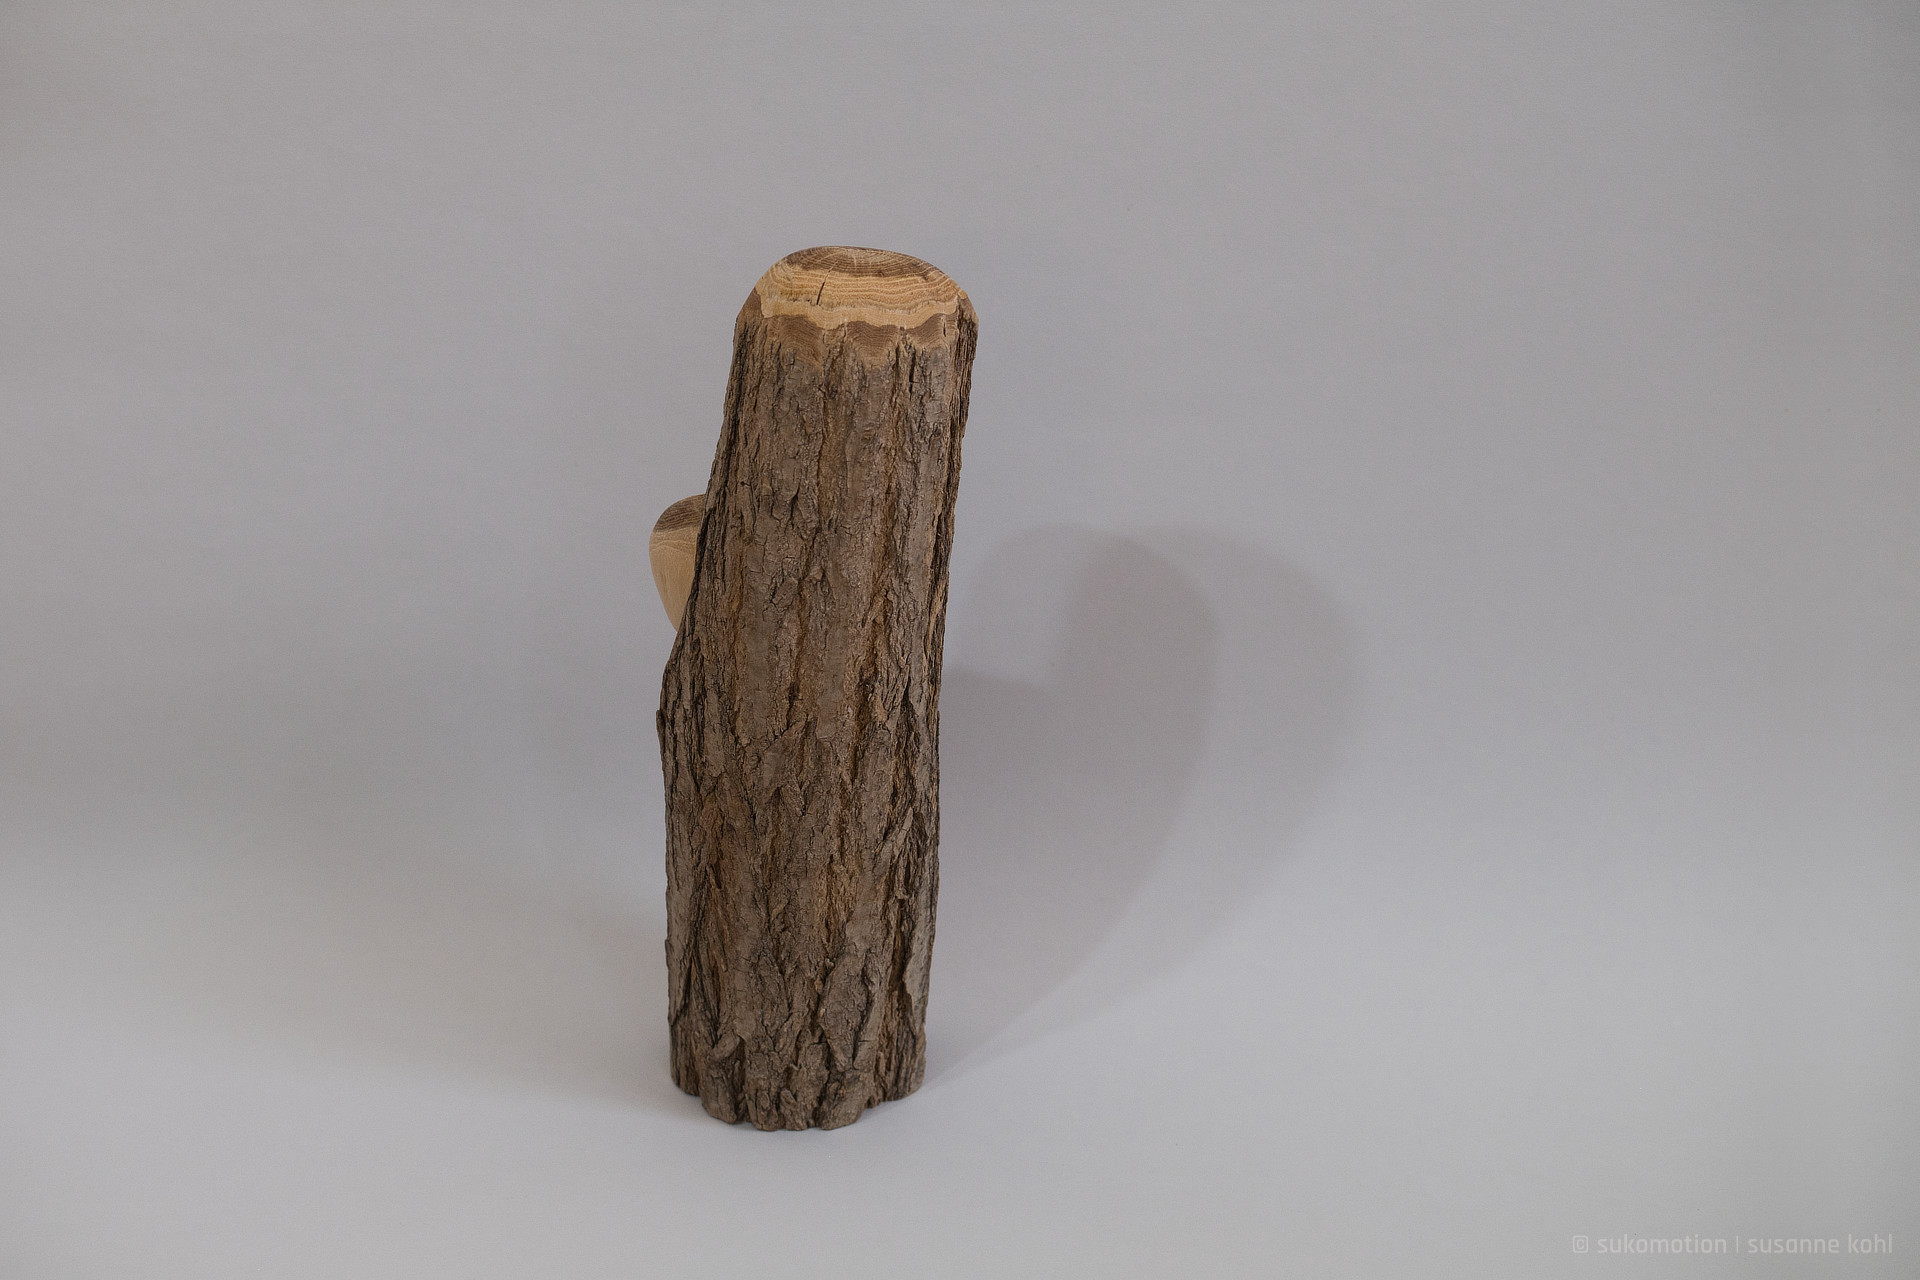 safe & curious - woodsculpture with bark  by sukomotion | susanne kohl - berlin